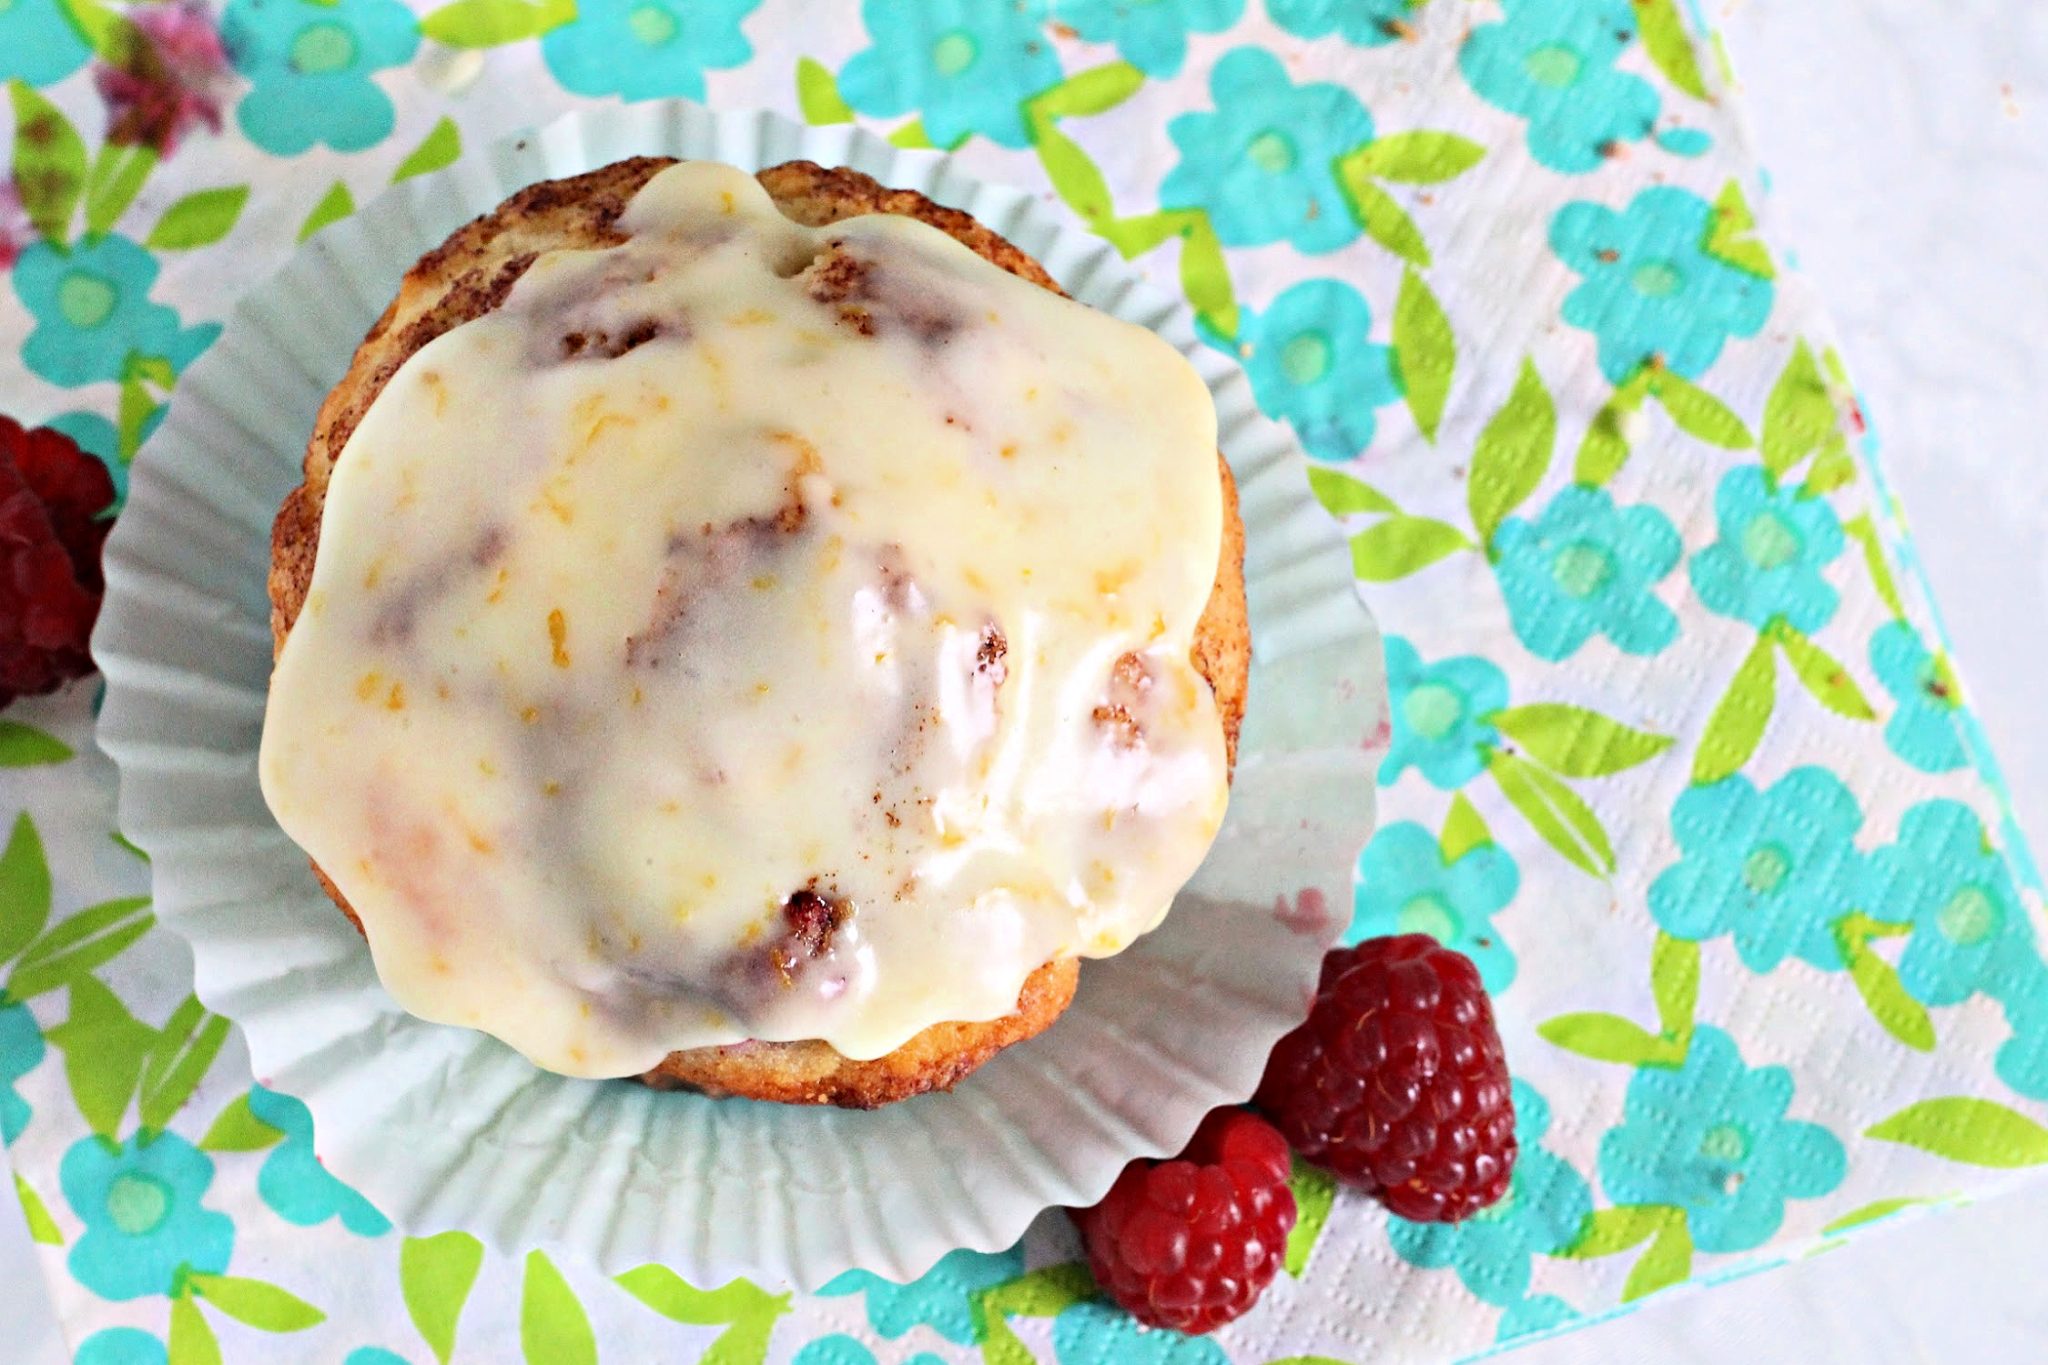 Easy recipe for classic muffin with your favorite berry. These very berry muffins are filled with raspberries with an orange glaze frosting.